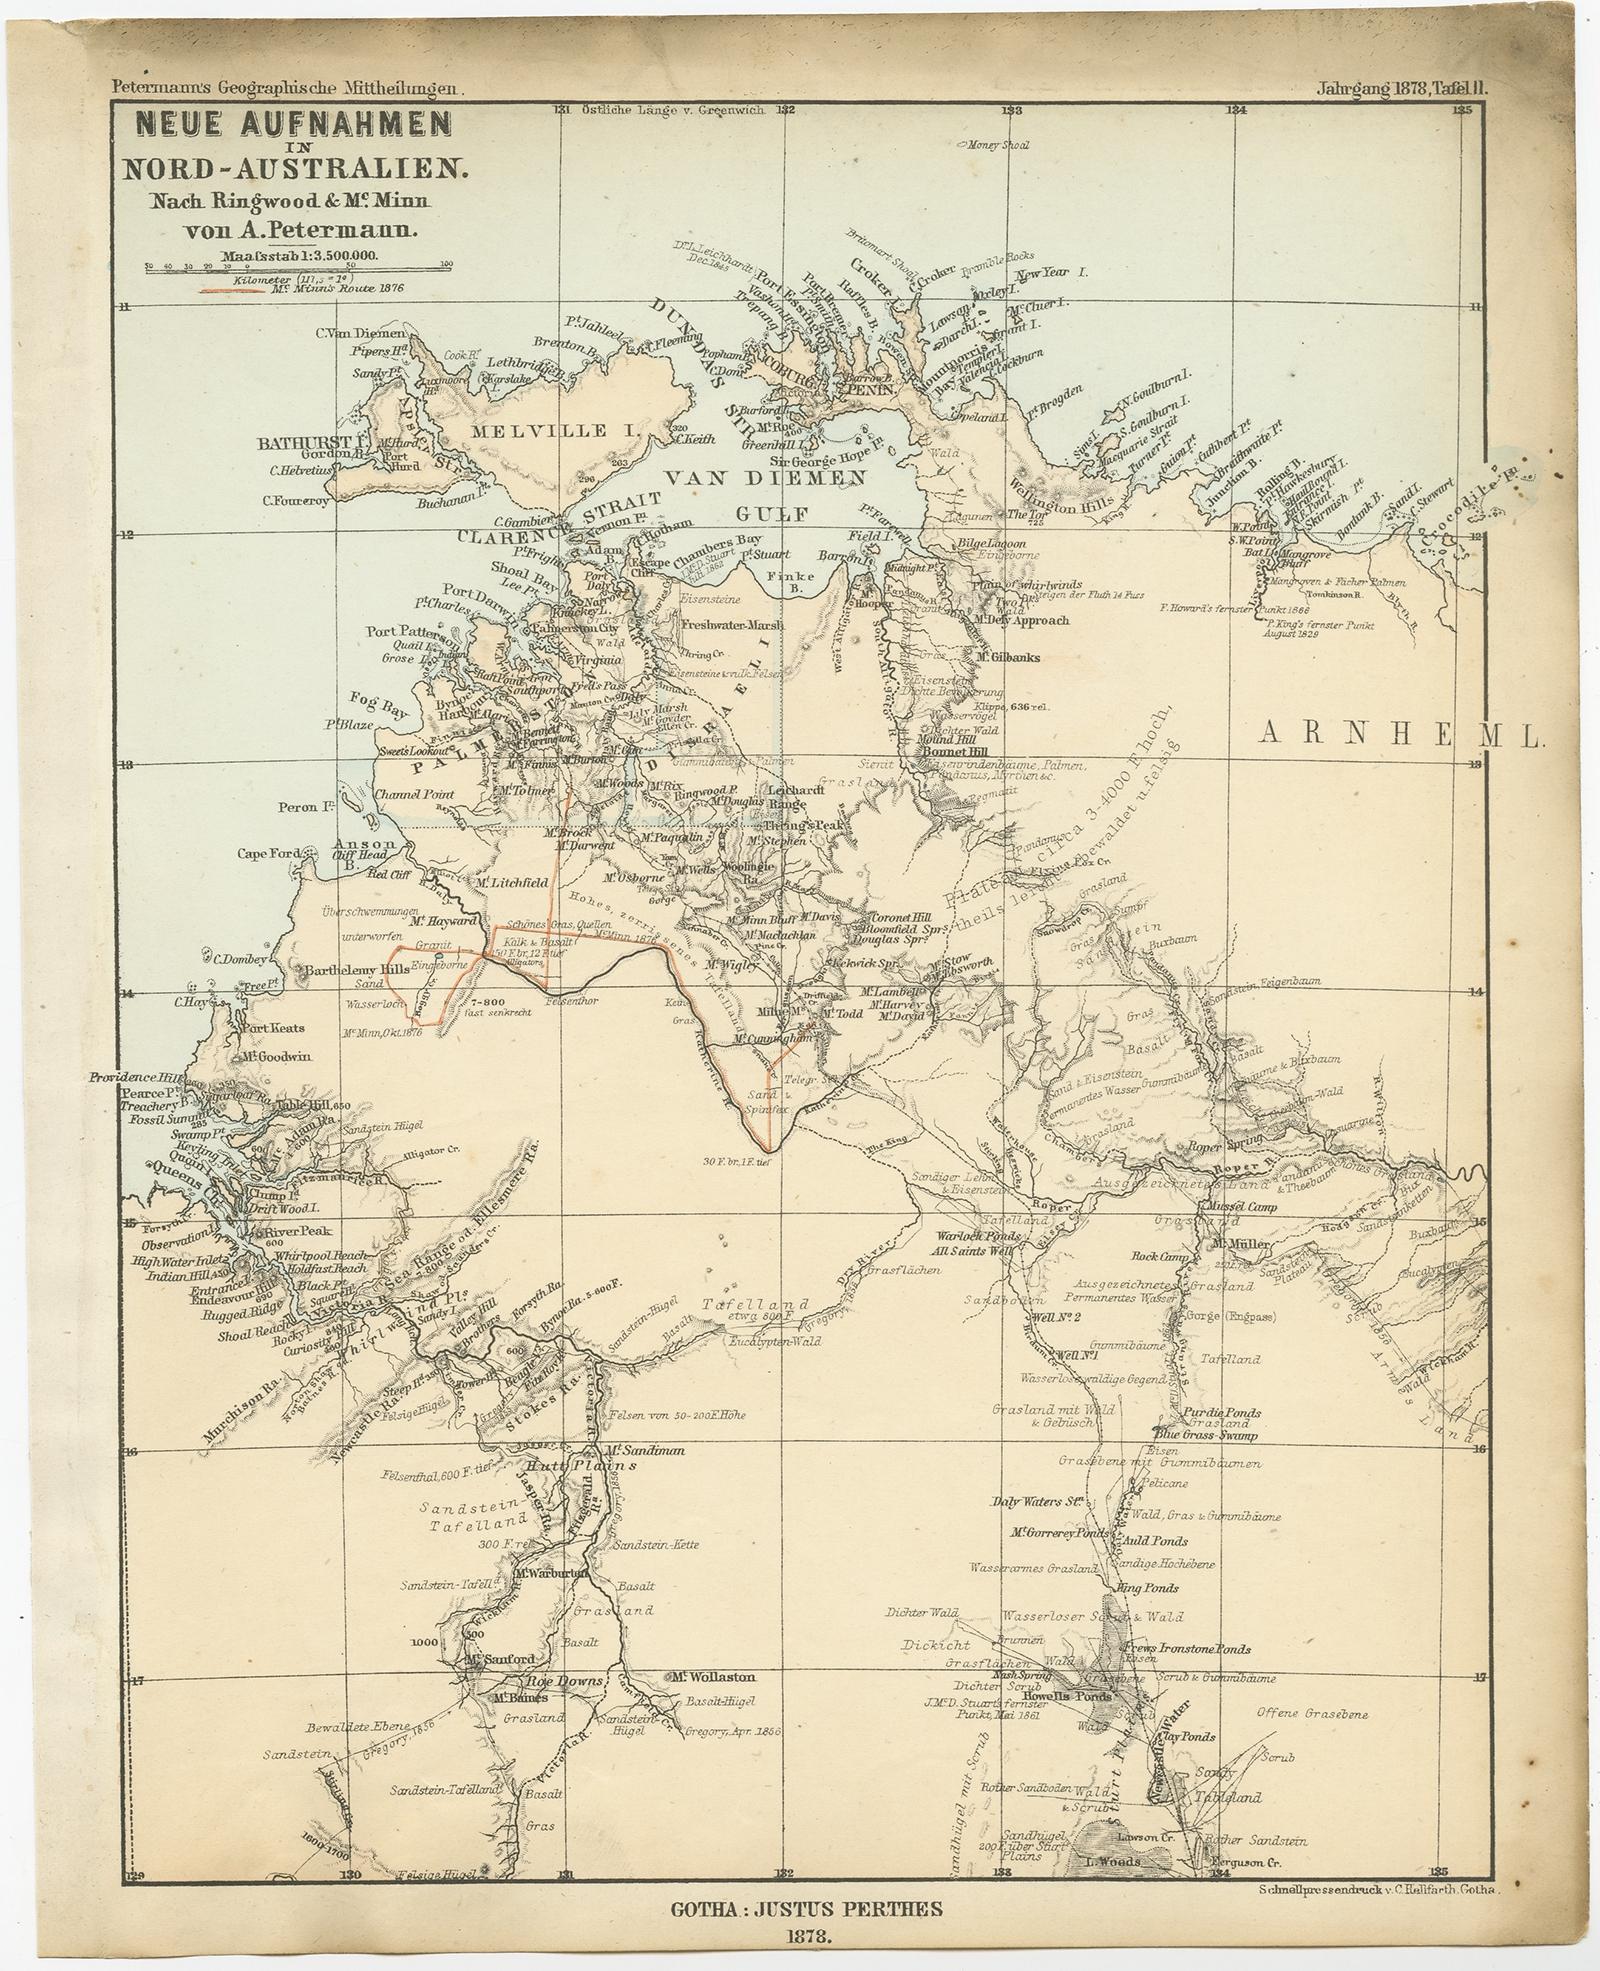 Antique map titled 'Neue Aufnahmen in Nord-Australien'. 

Old map of Northern Australia showing the 'new routes' of the exploration of Ringwood and McMinn. Covers as far east as part of Arnheim Land at Crocodile Island and Cape Stewart. This map